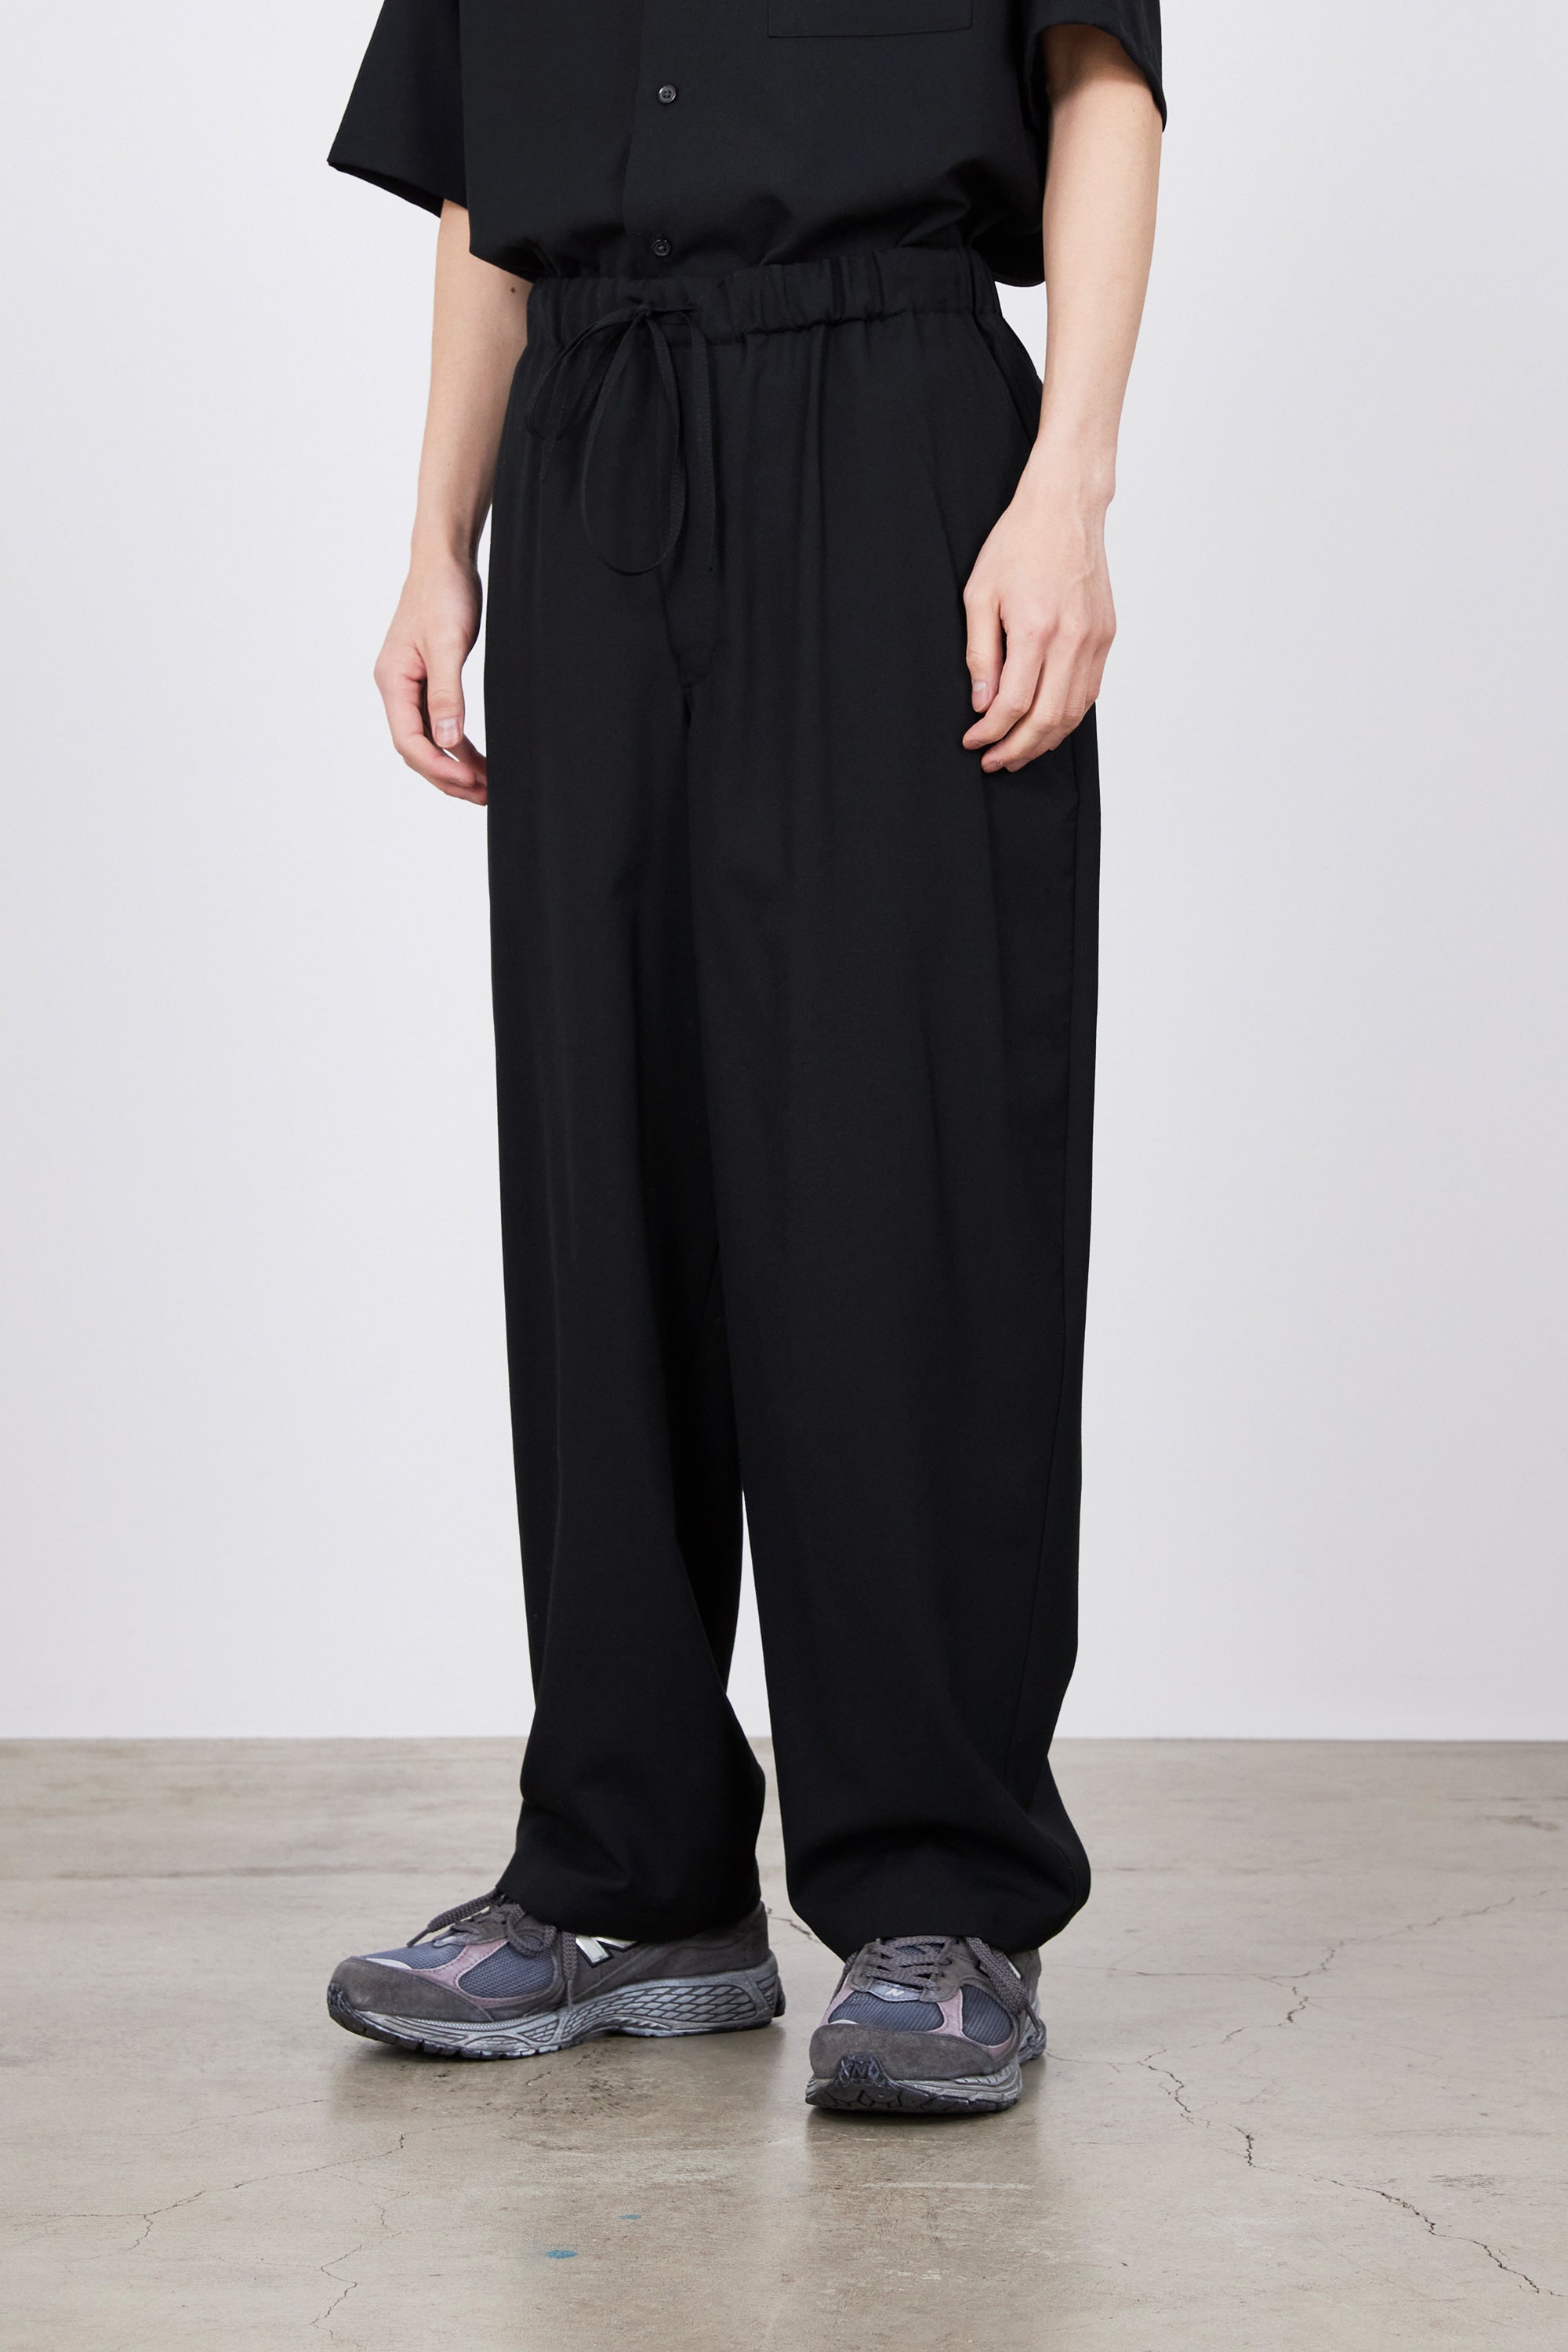 TUMBLED WOOL TROPICAL COCOON WIDE EASY PANTS, Black